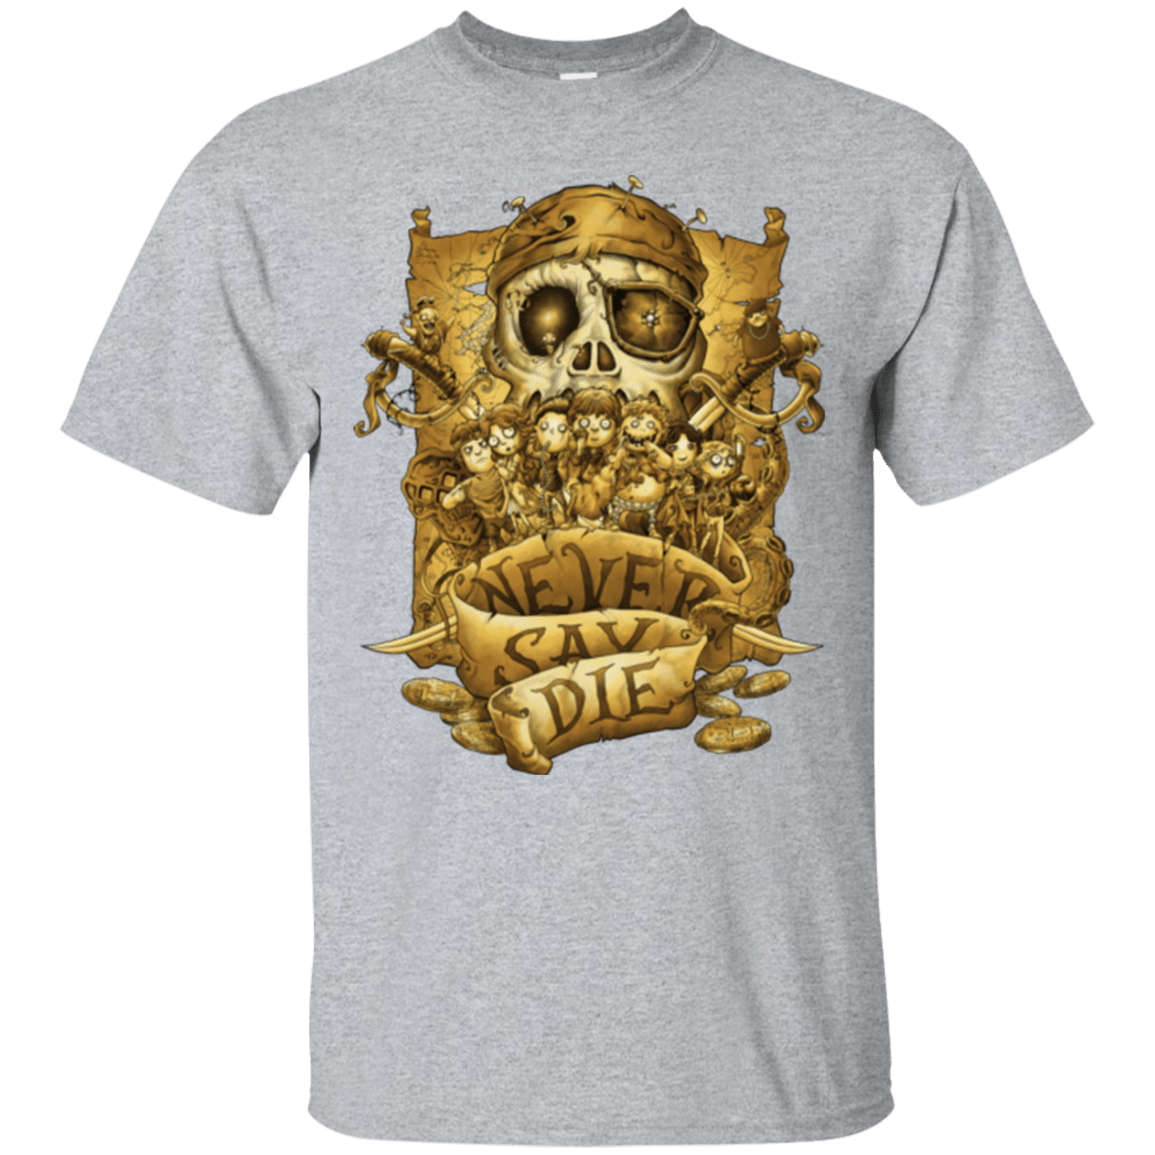 T-Shirts Sport Grey / Small Never Say Die T-Shirt